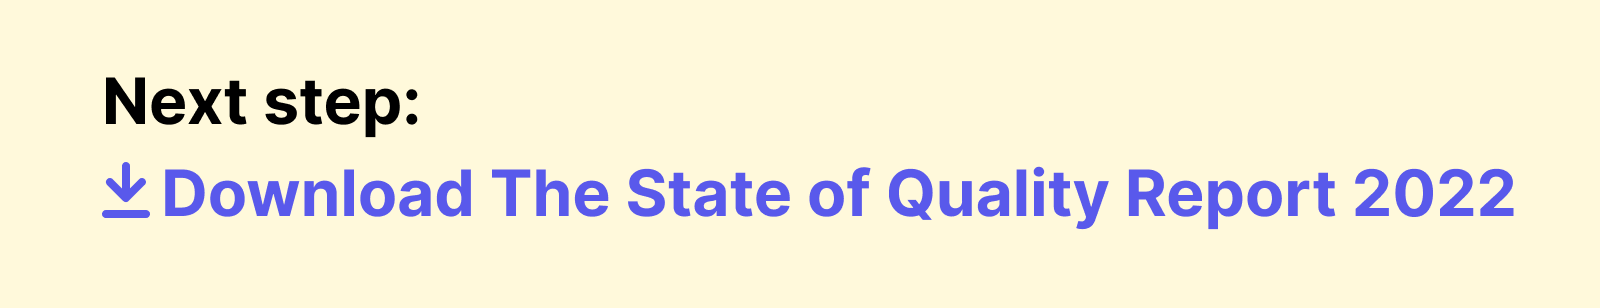 Download the State of Quality Report 2022